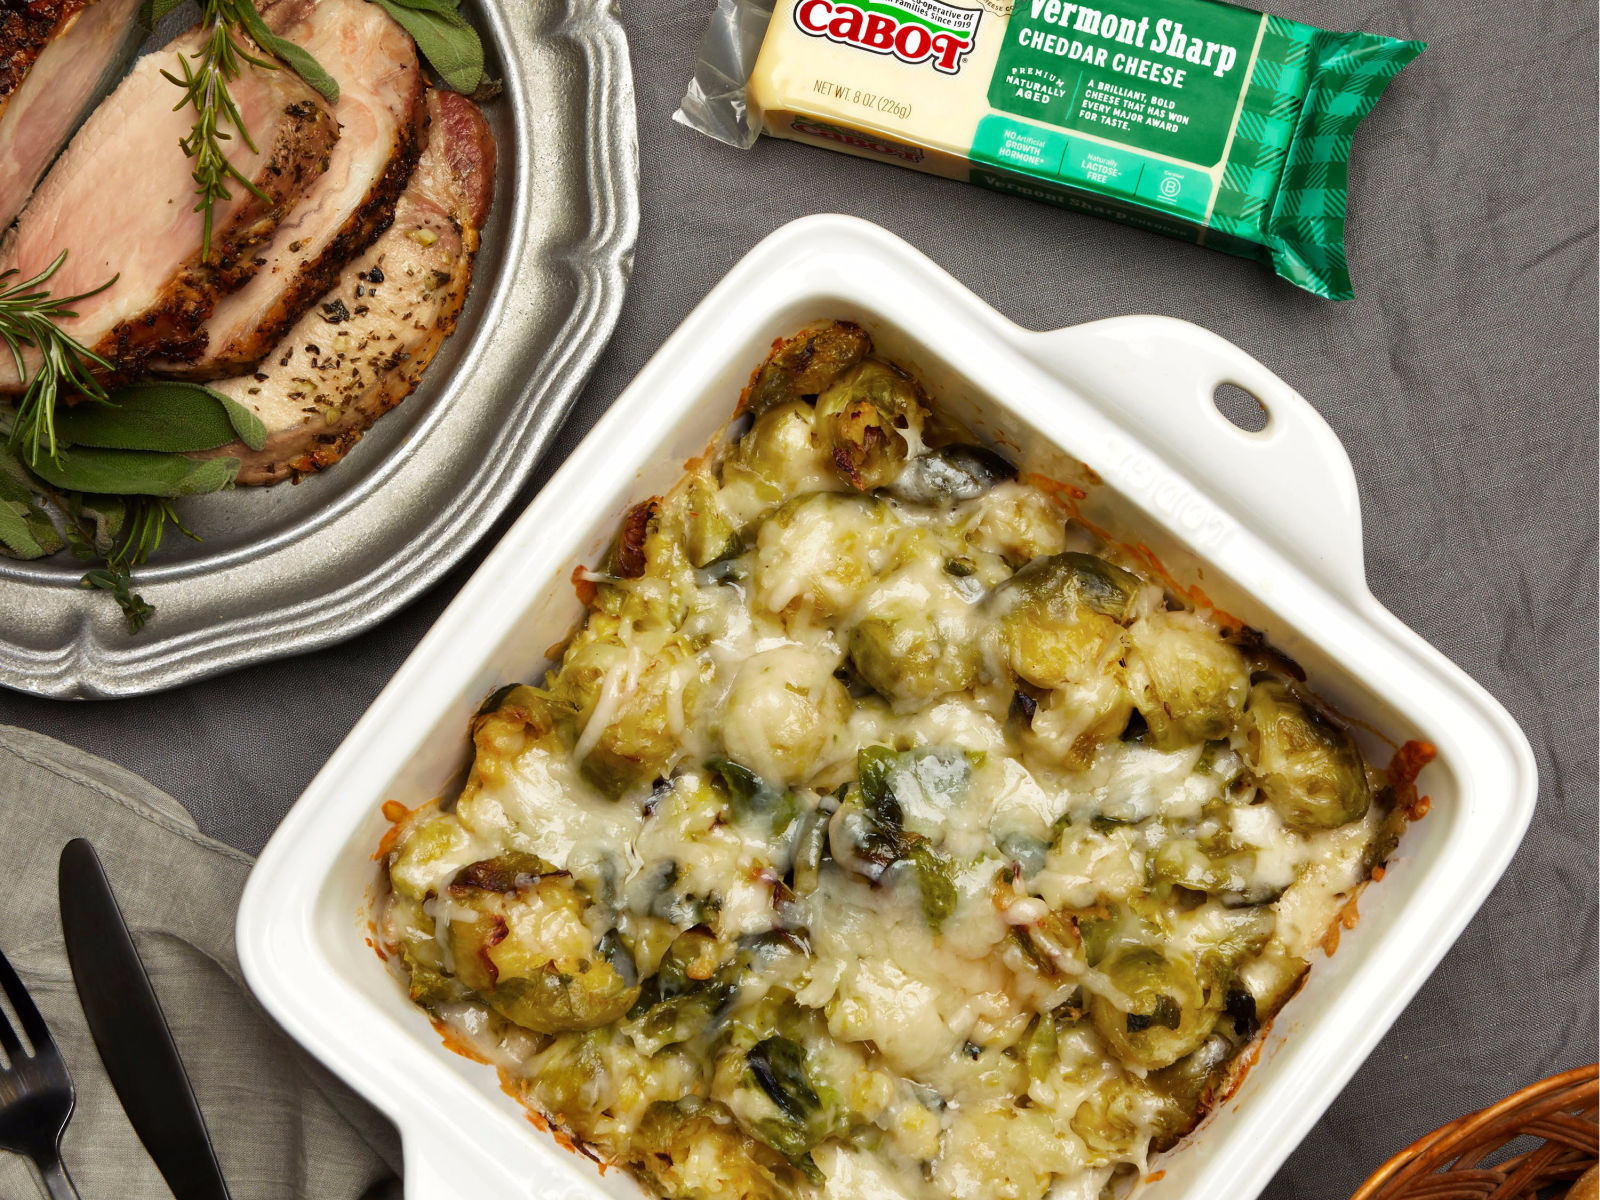 Grab Big Savings For Your Holiday Meal – Try This Recipe from Cabot for Smashed Brussel Sprouts With Cheese